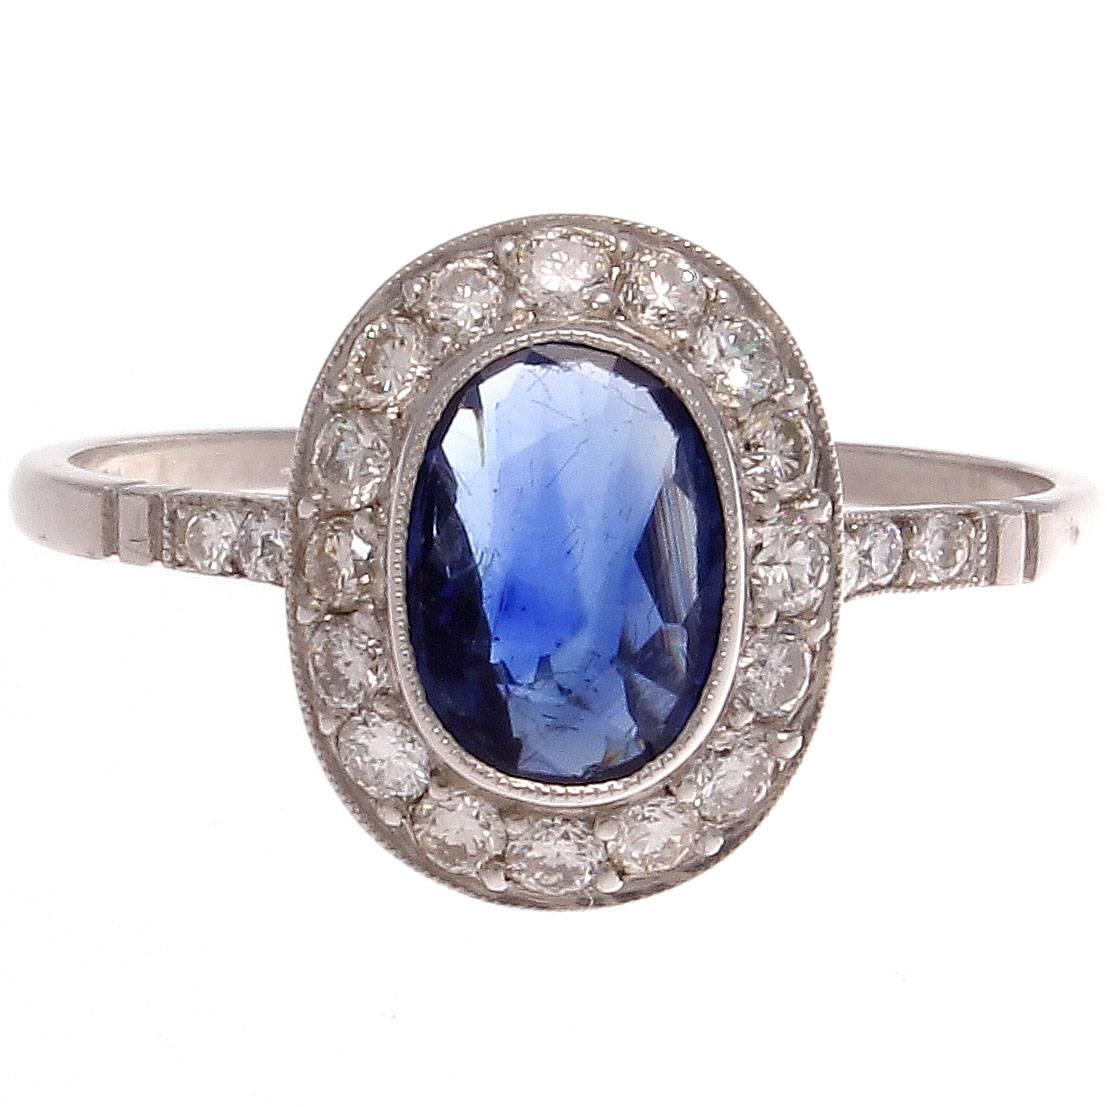 Forever in style, the classic halo ring. Featuring an approximately 1.00 carat deep blue oval cut sapphire elegantly surrounded by a  halo of colorless diamonds. Expertly hand crafted in platinum.

Ring size 7 and may be resized.